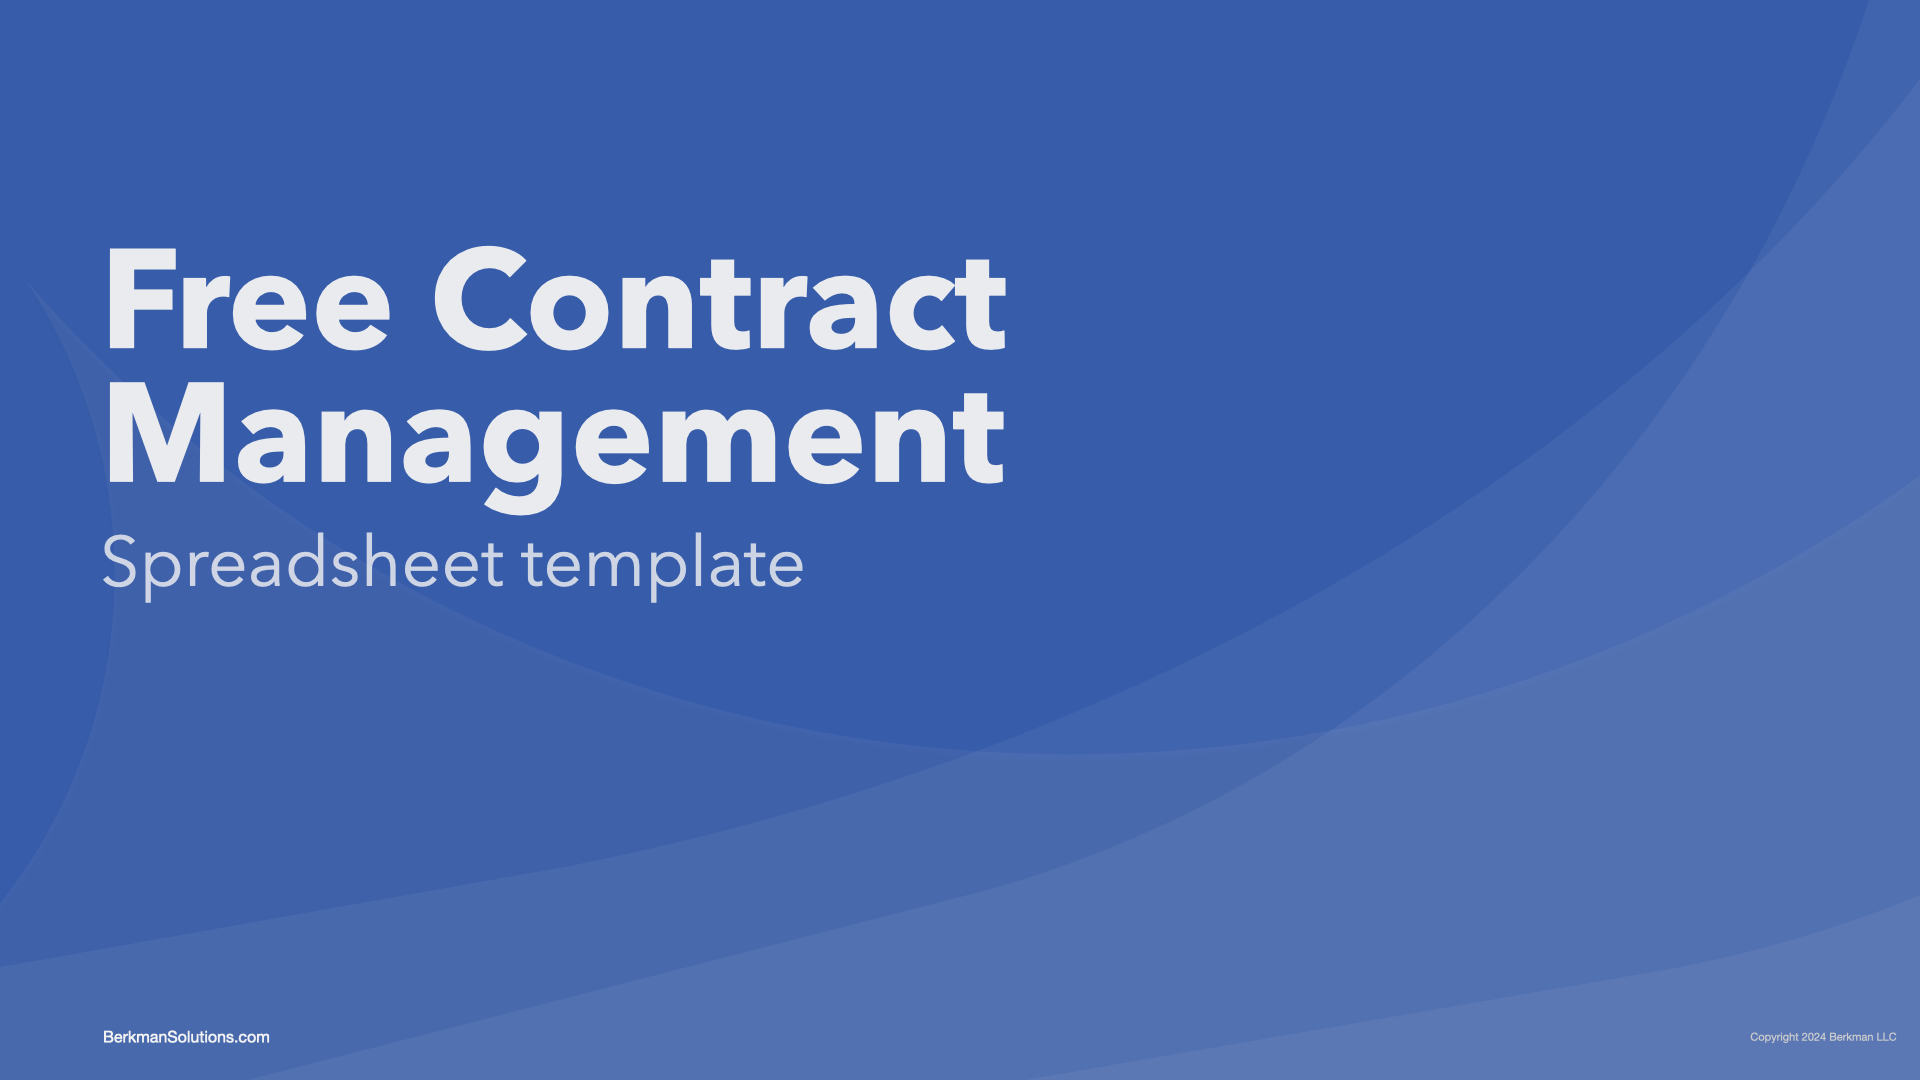 Free Contract Management Spreadsheet